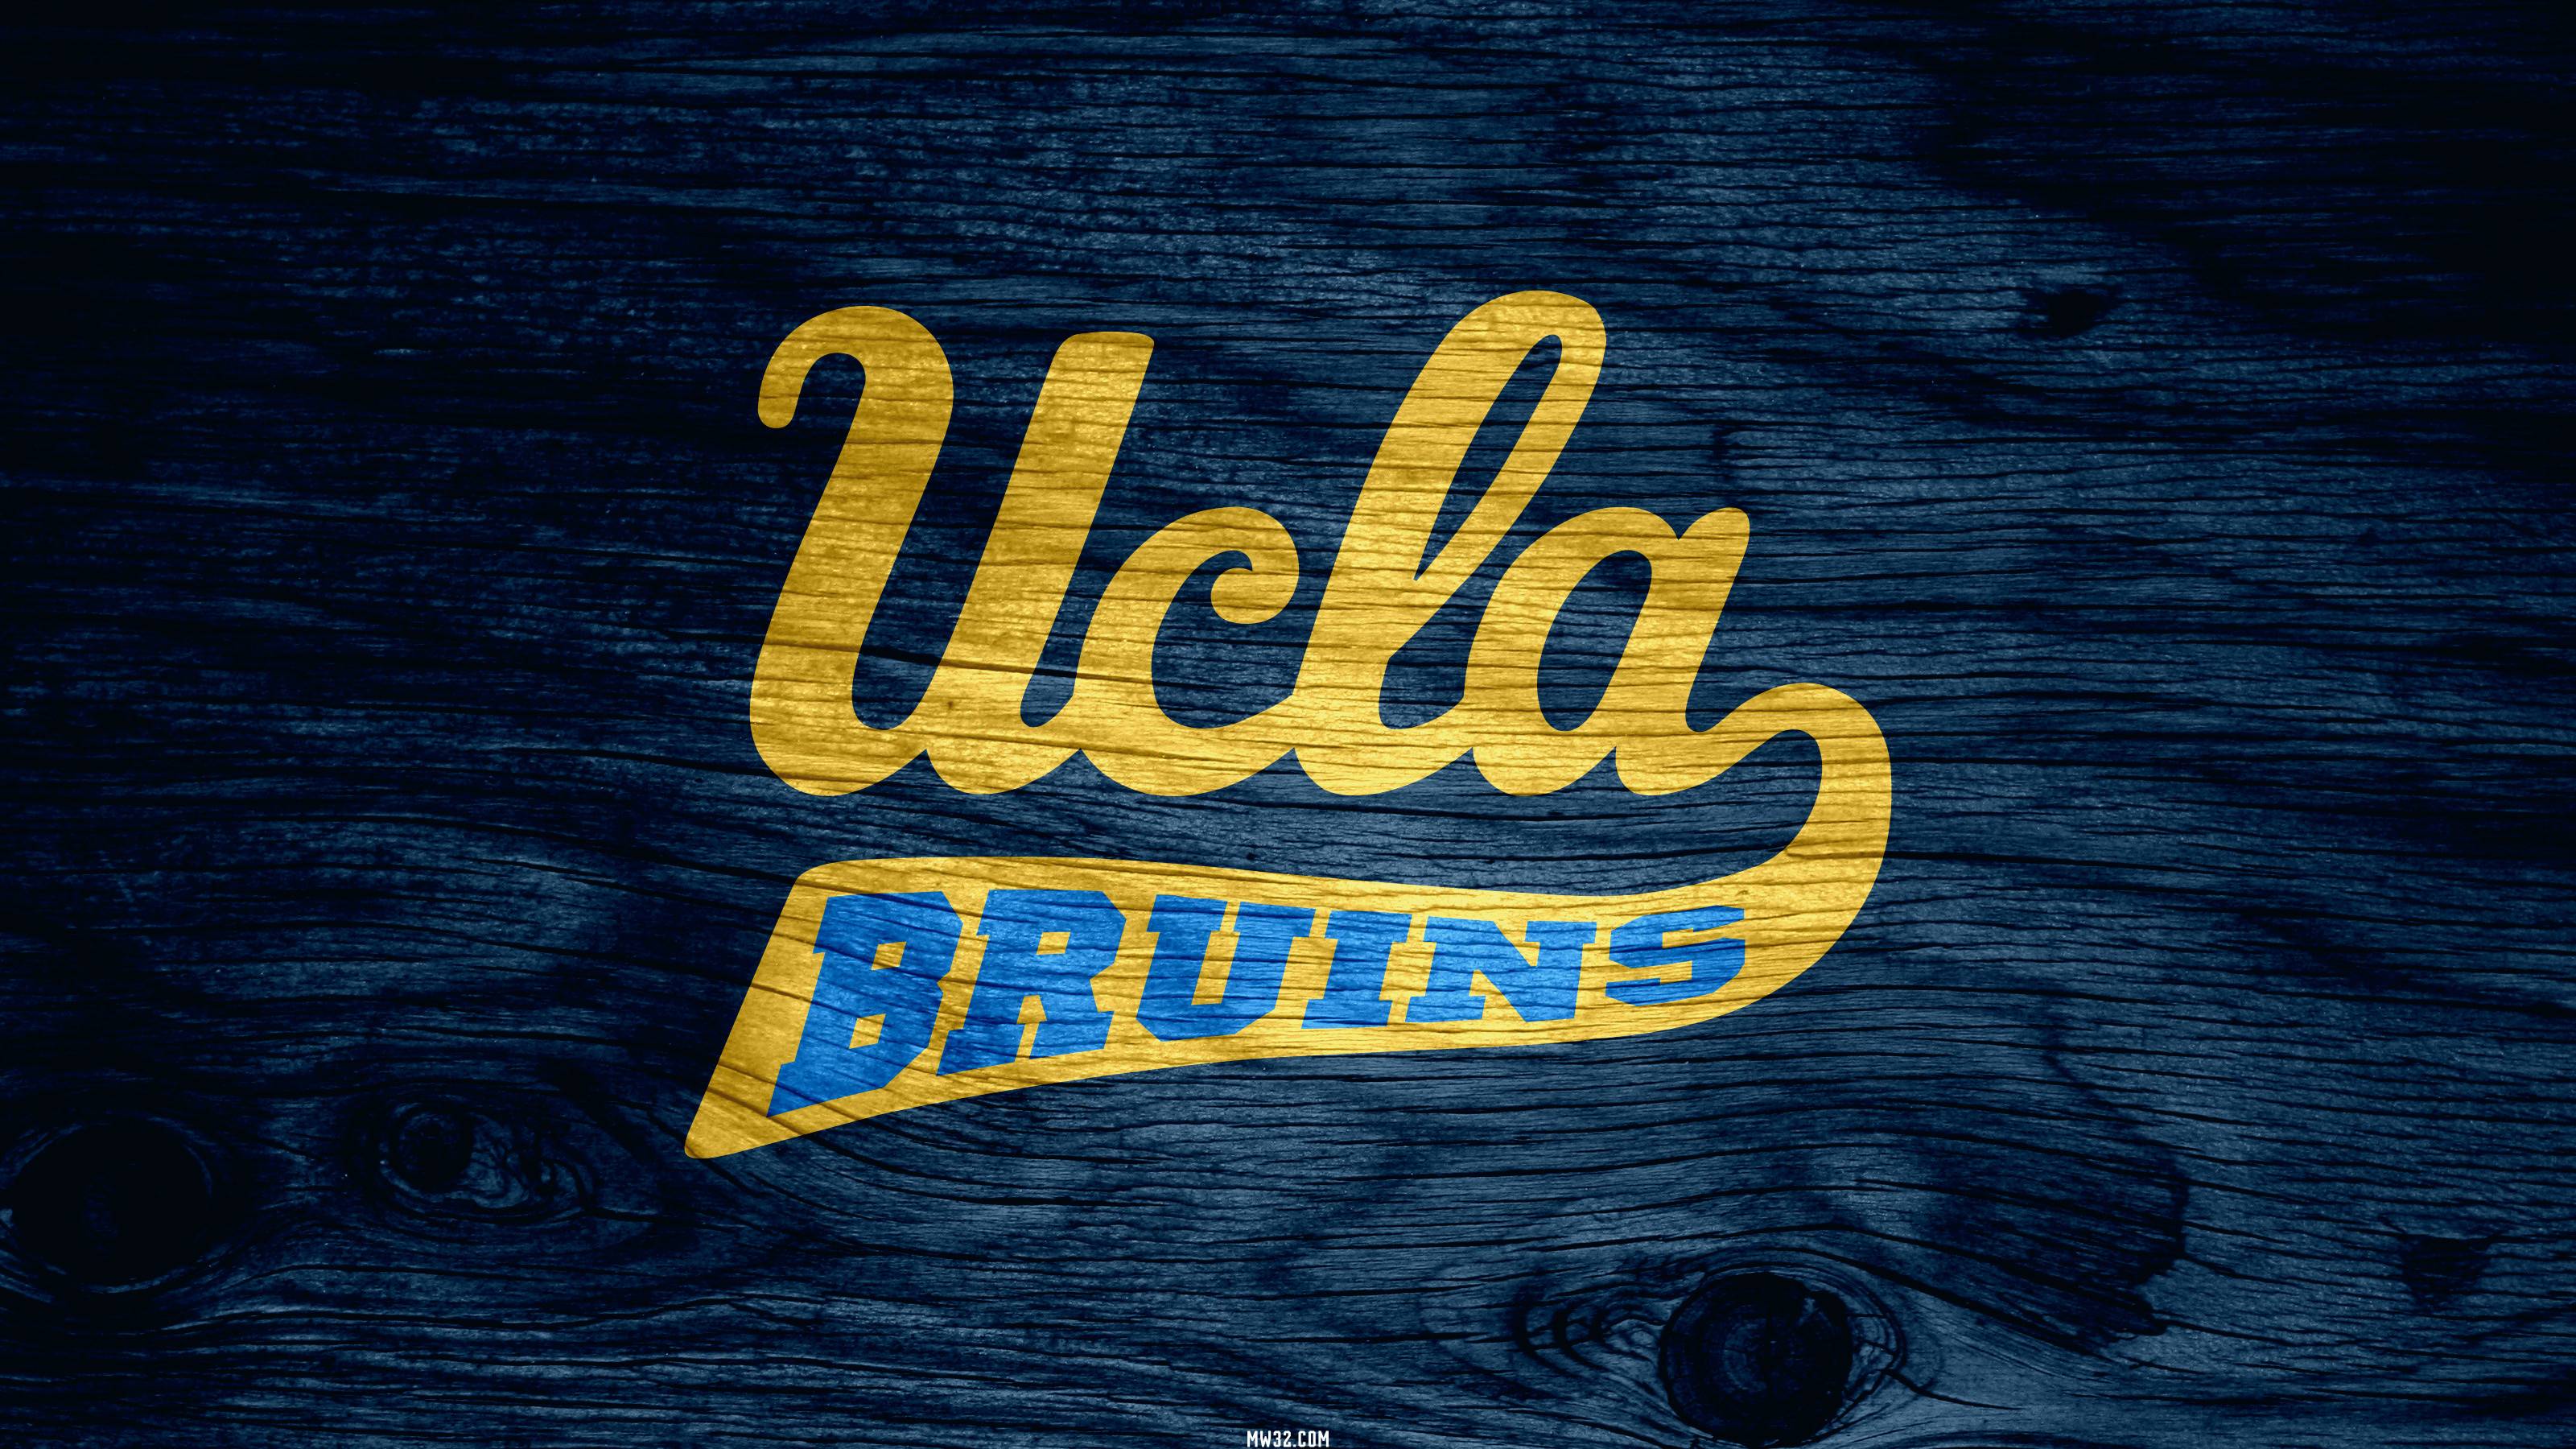 UCLA Athletics on X Its Wednesday Time to update your wallpaper  WallpaperWednesday  GoBruins httpstcooTXBrNpV29  X